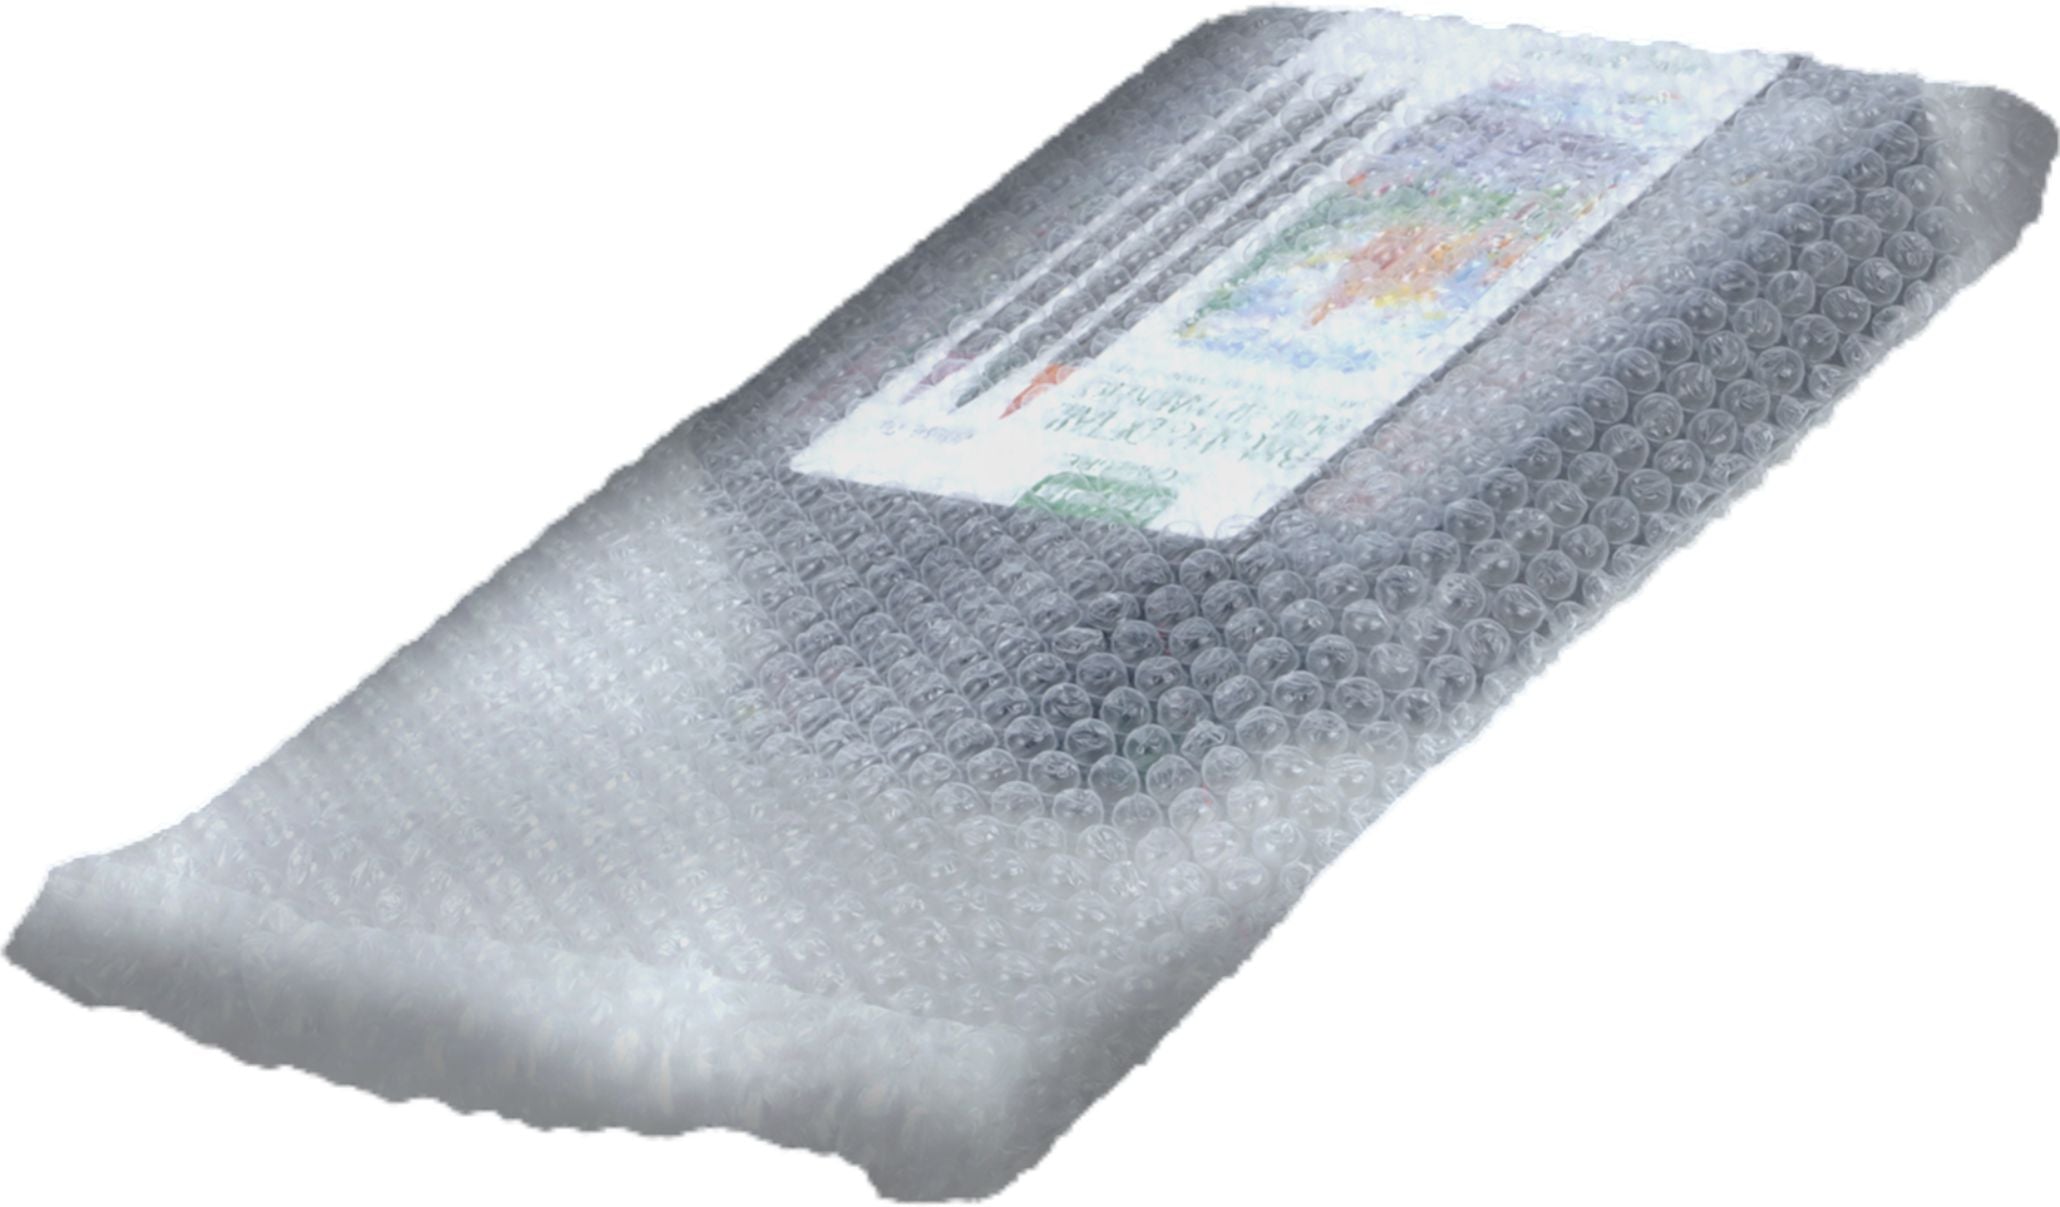 Sealed Air - 3/16" x 12" x 12" Bubble Bag With 1.5" lip Seal & Tape, 650/Cs - 100858814